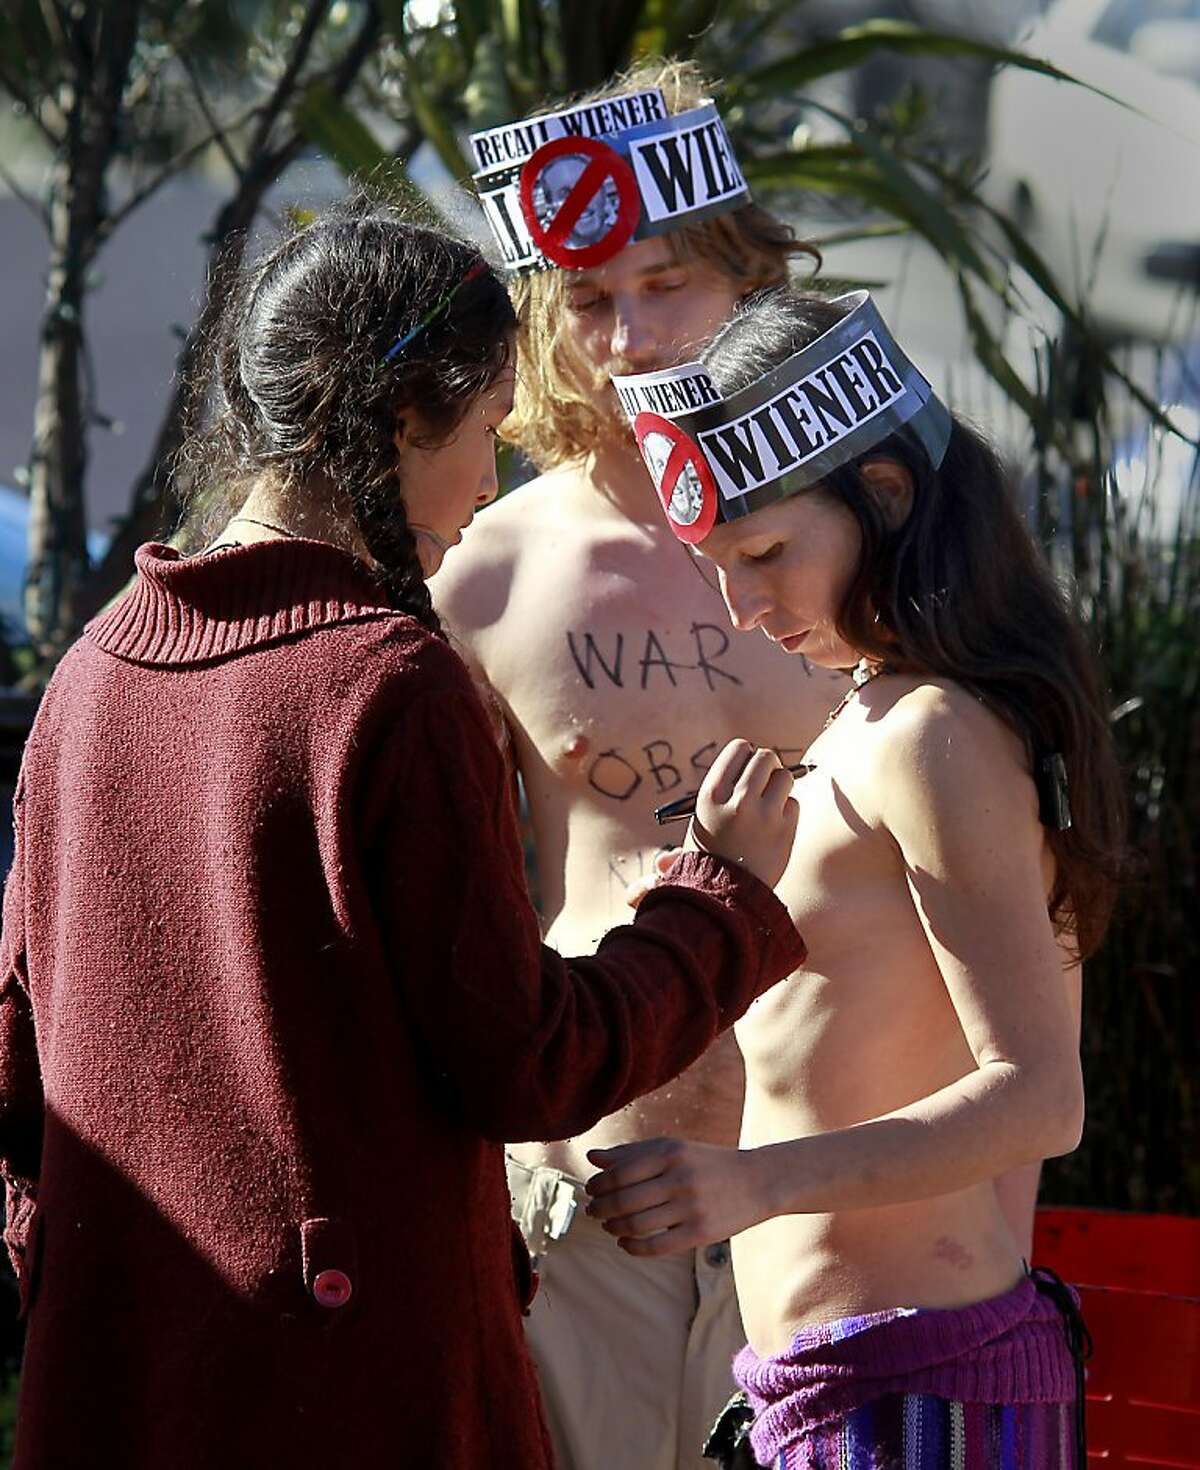 Inti Gonzalez (left) wrote a message of support on her mother's body, Gypsy Taub, before the start of the rally Sunday November 17, 2013 in San Francisco, Calif. Police arrested and cited a group of nudists who staged a rally at the corner of Market and Castro Streets, violating the city's nudity ban.